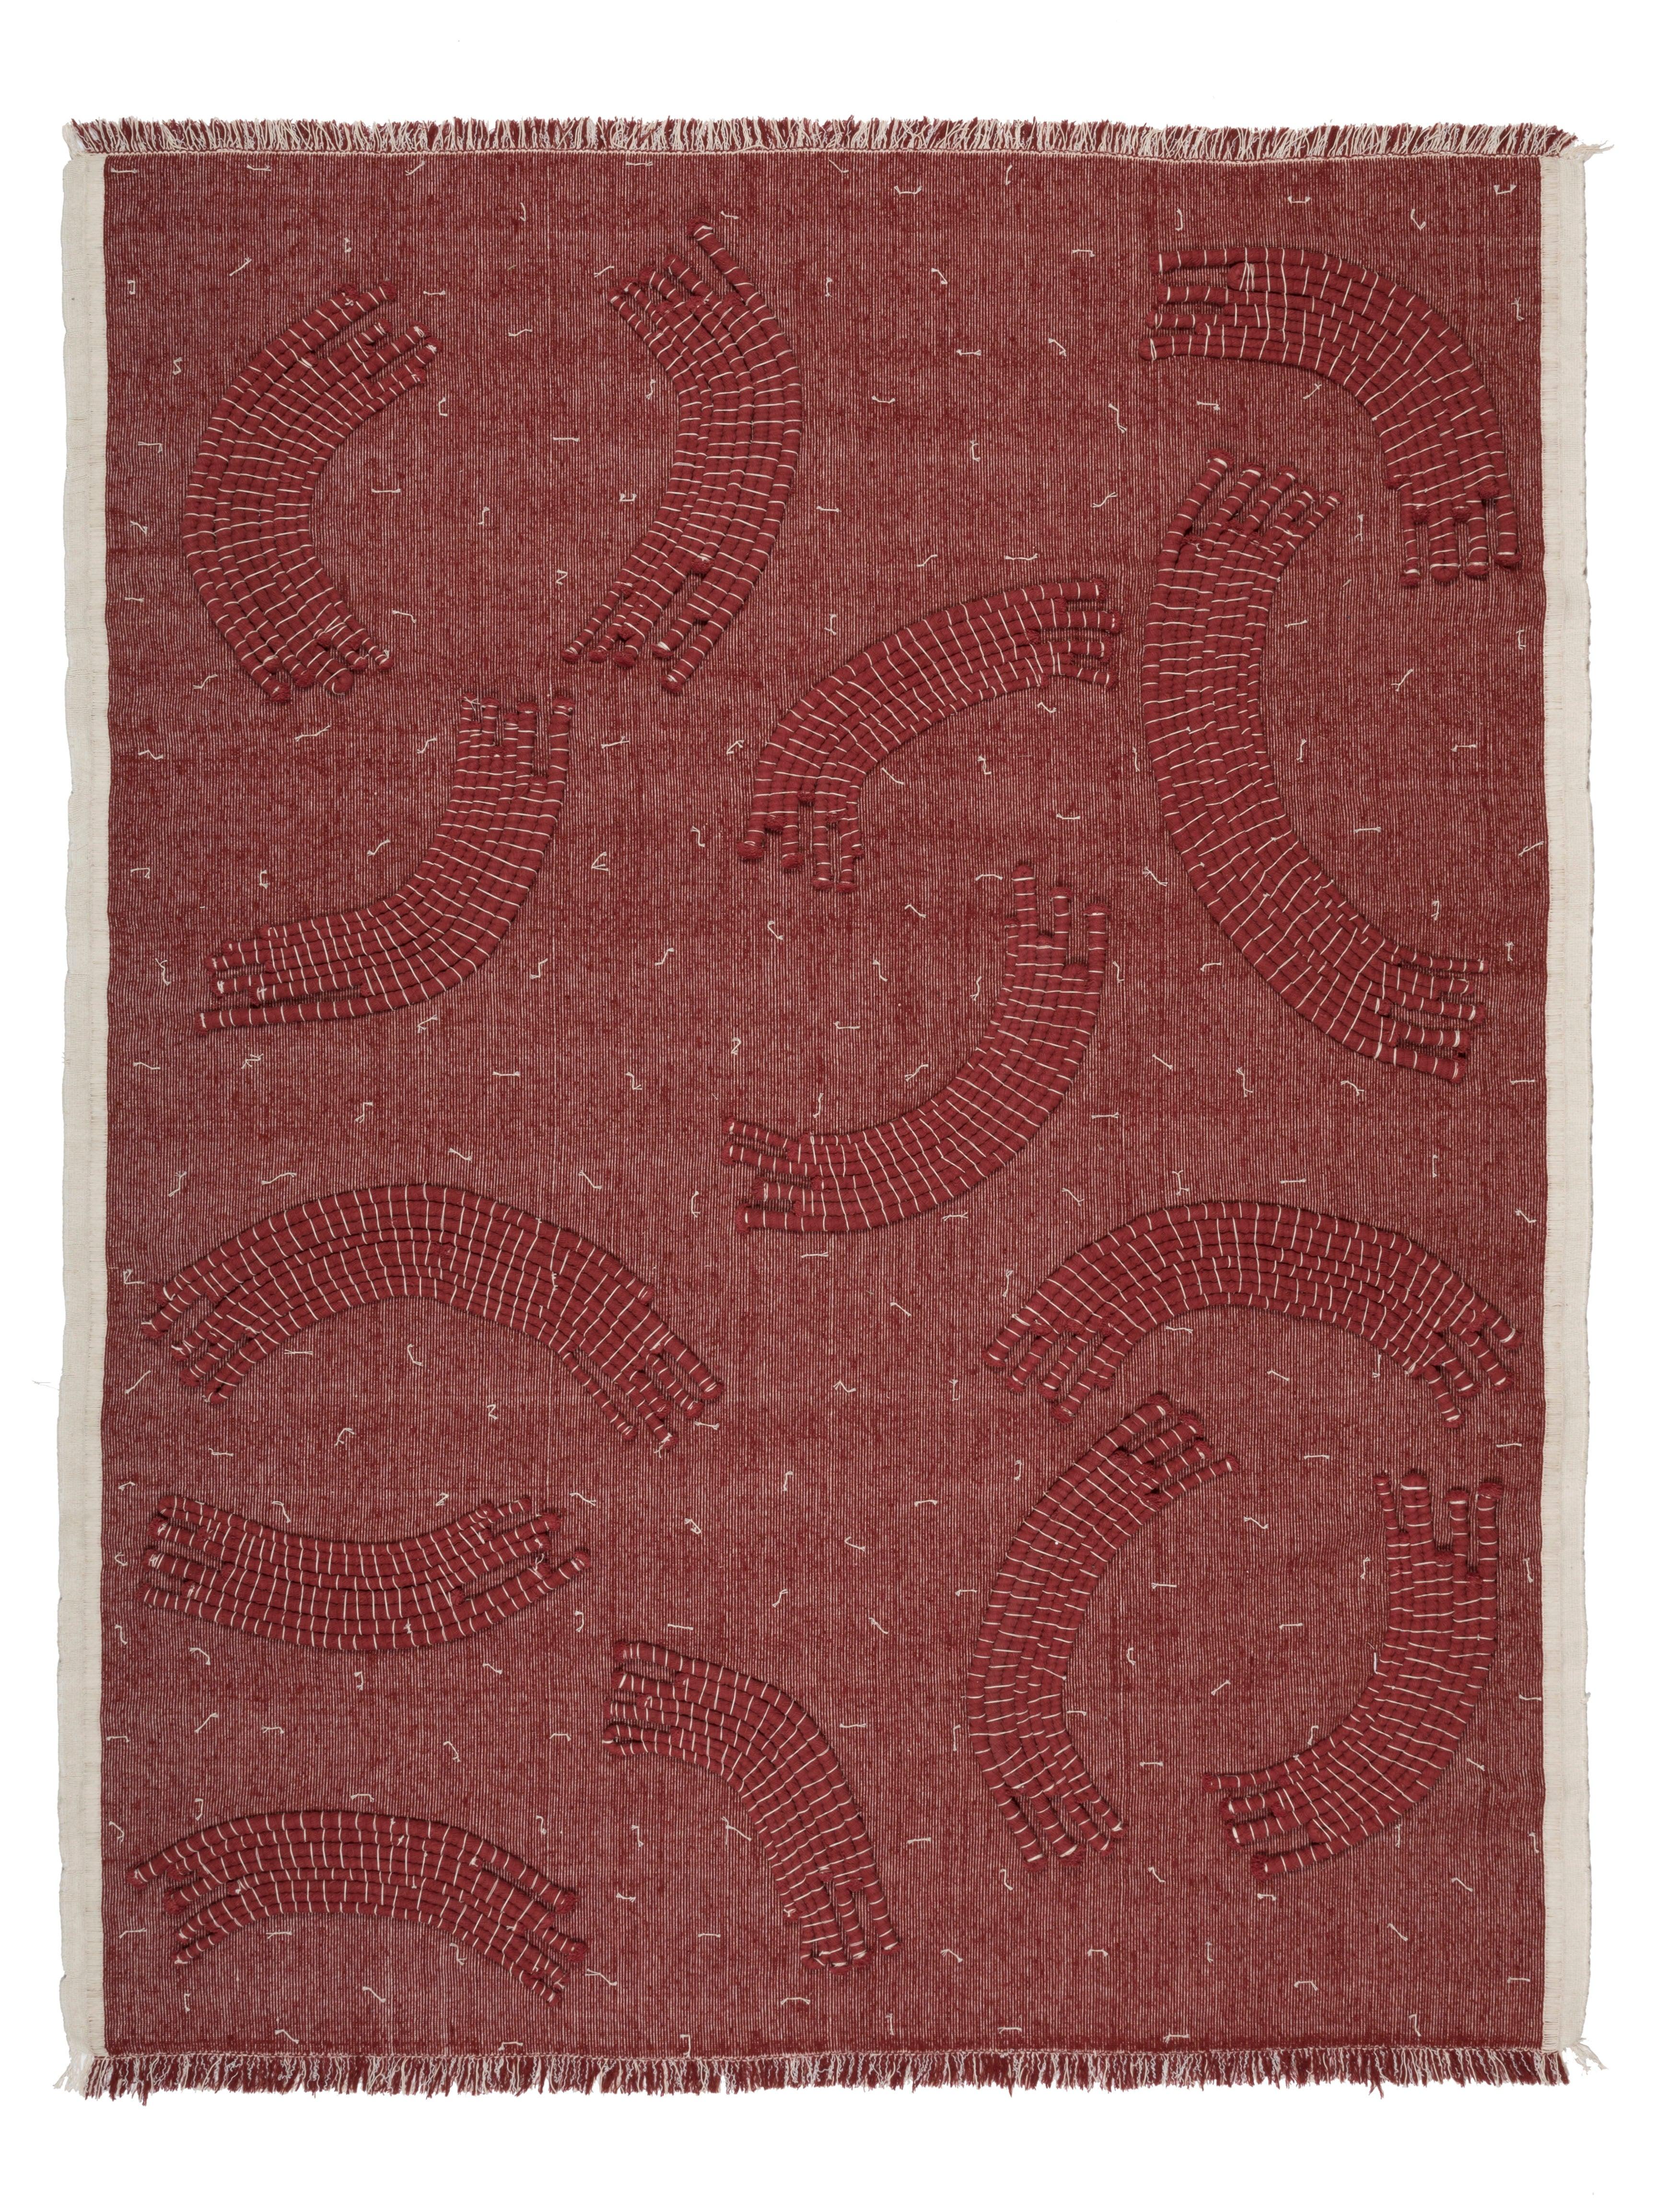 For Sale: Red cc-tapis Inventory Quilt Rug by Faye Toogood